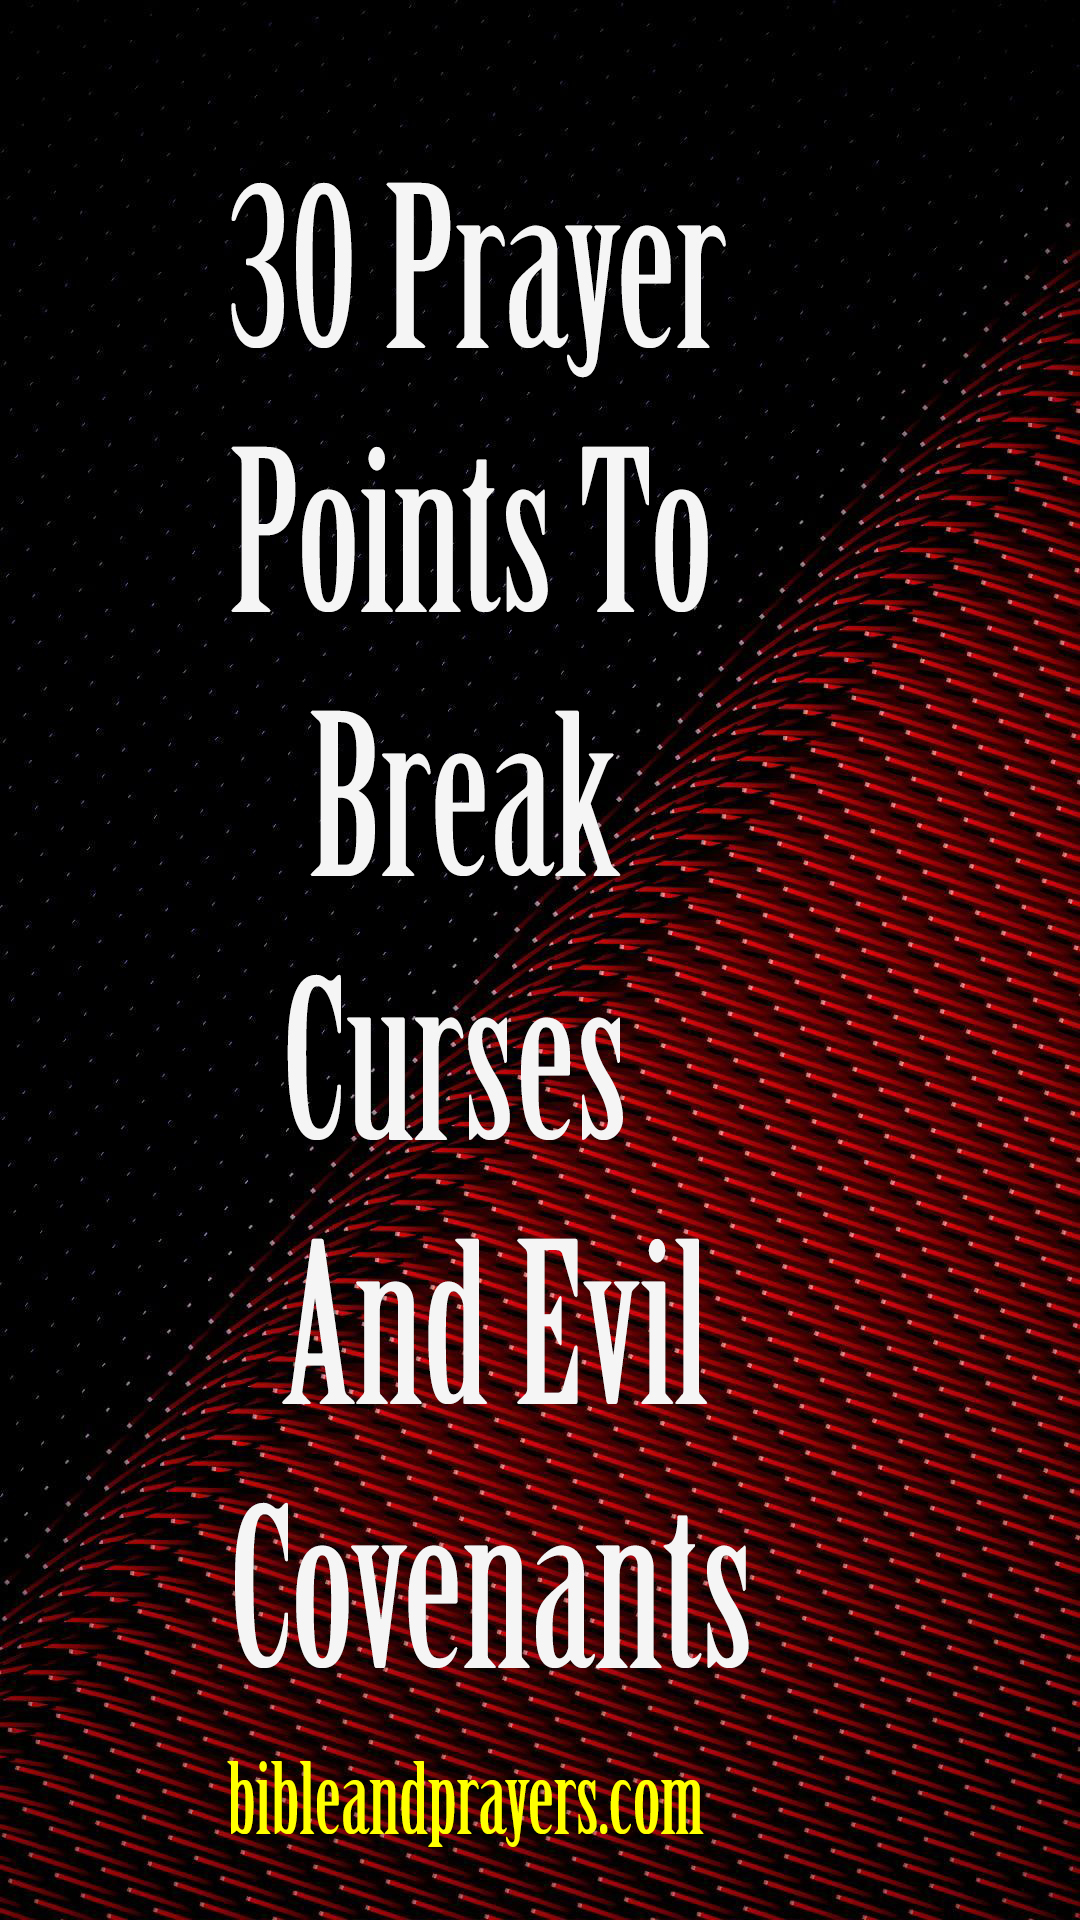 30 Prayer Points To Break Curses And Evil Covenants